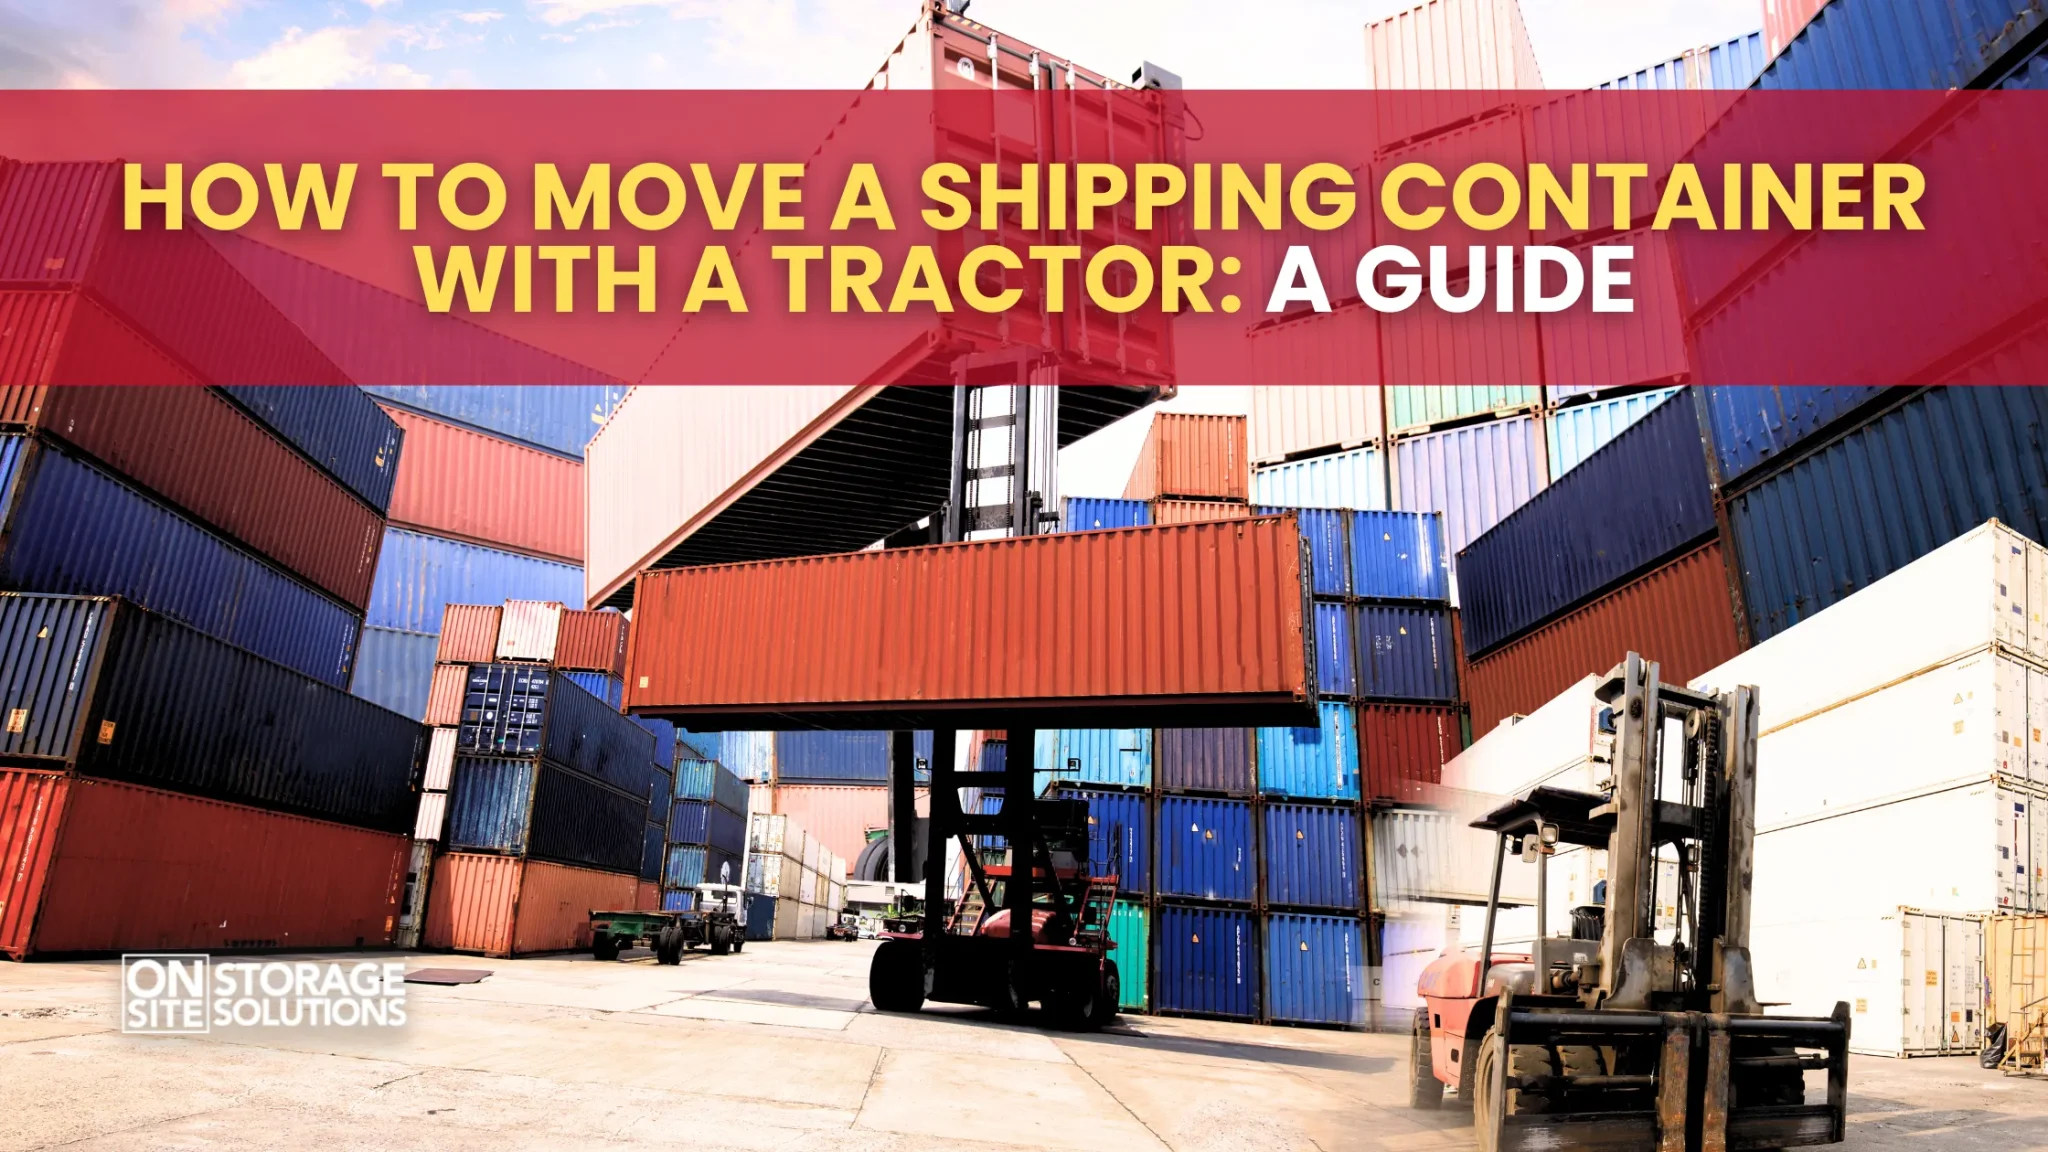 Benefits of Using a Tractor to Move Shipping Containers